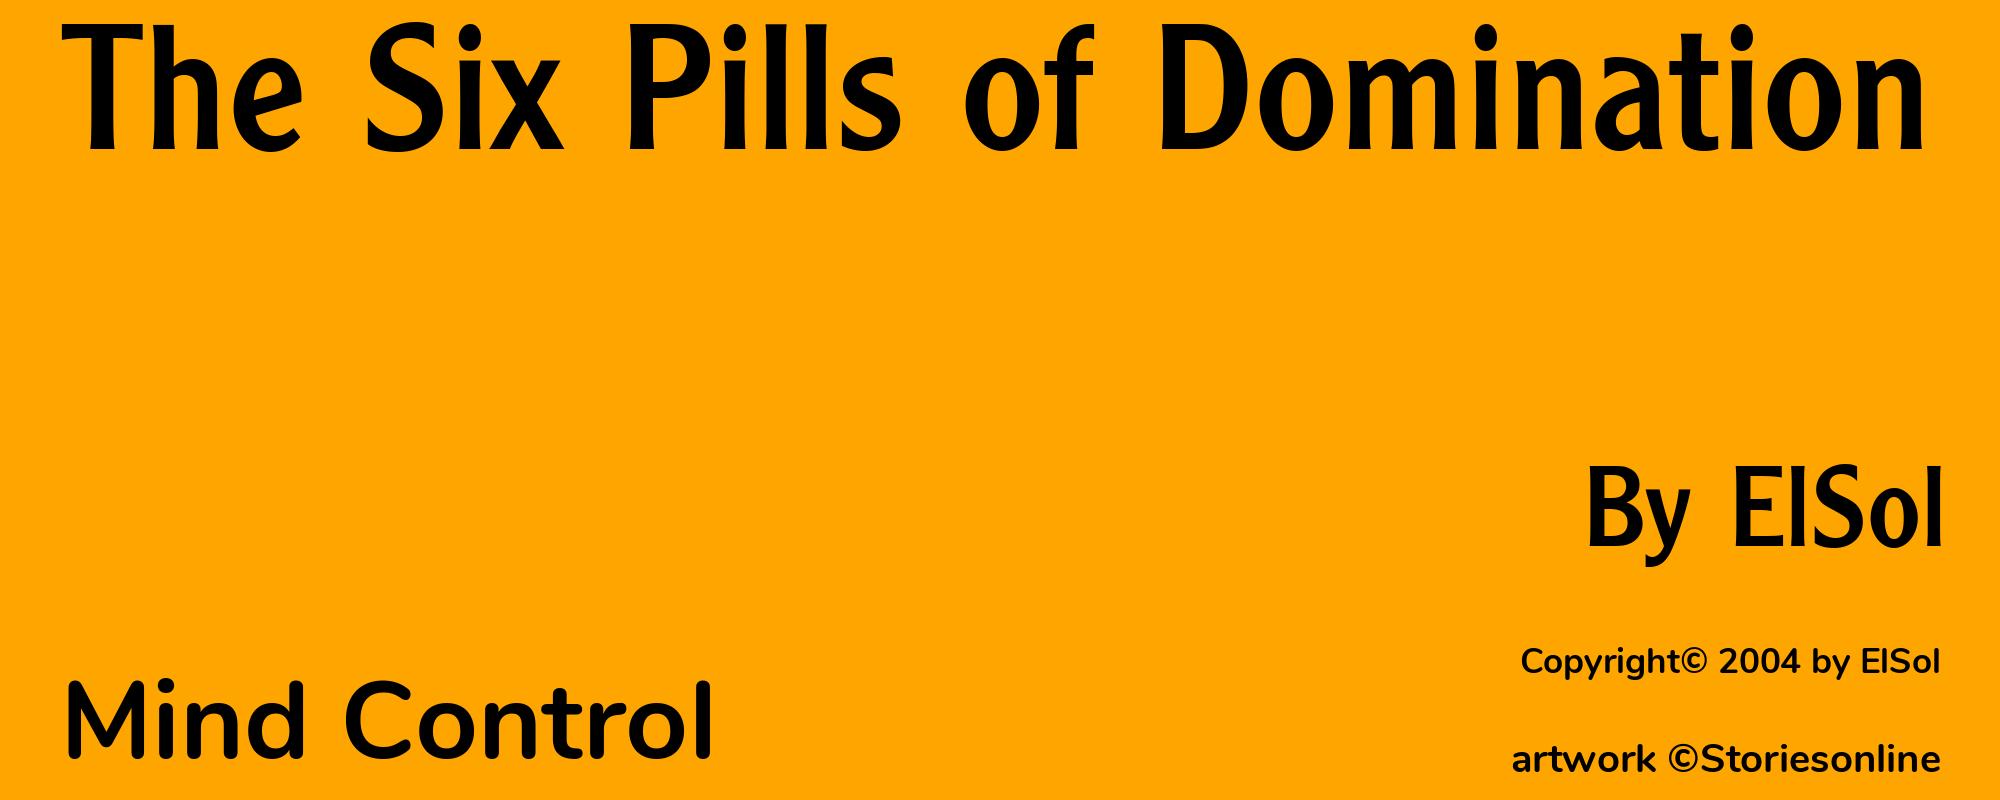 The Six Pills of Domination - Cover